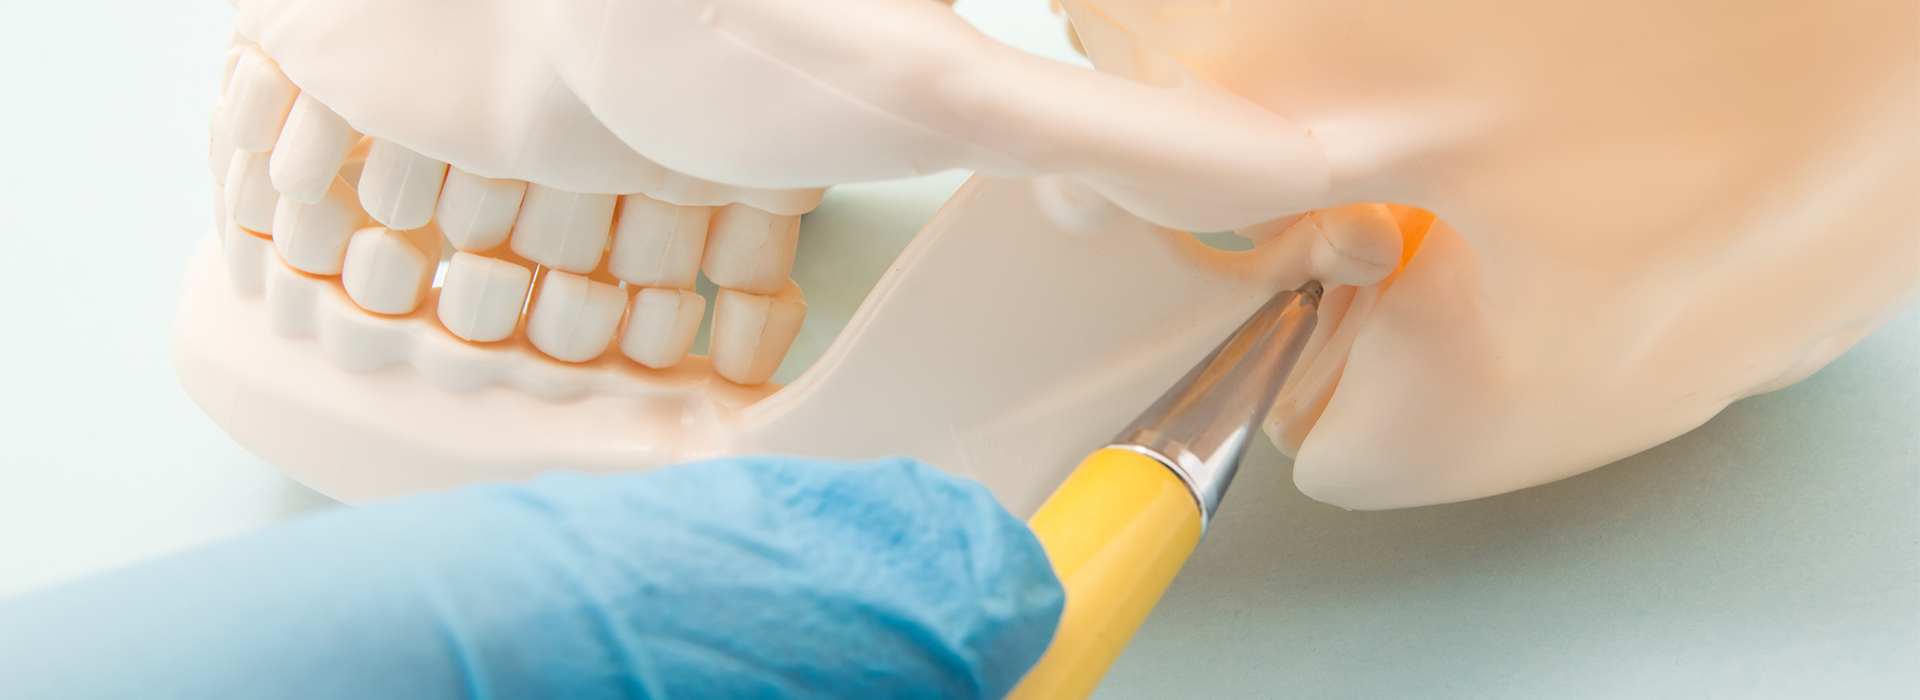 Schneider Family   Cosmetic Dentistry | Periodontal Treatment, CBCT and Full Mouth Reconstruction